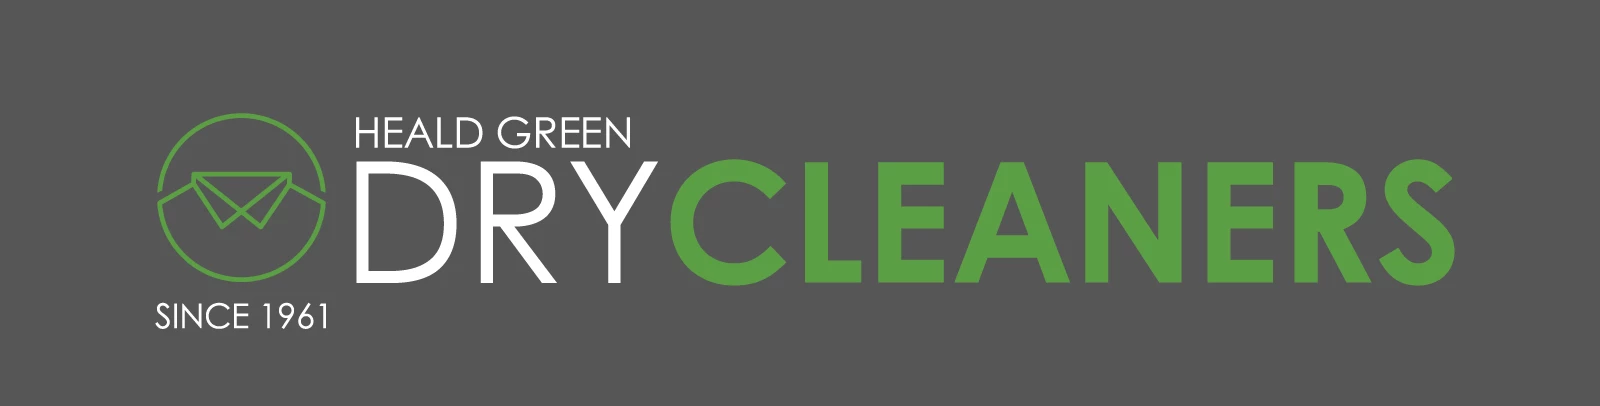 Heald Green Dry Cleaners